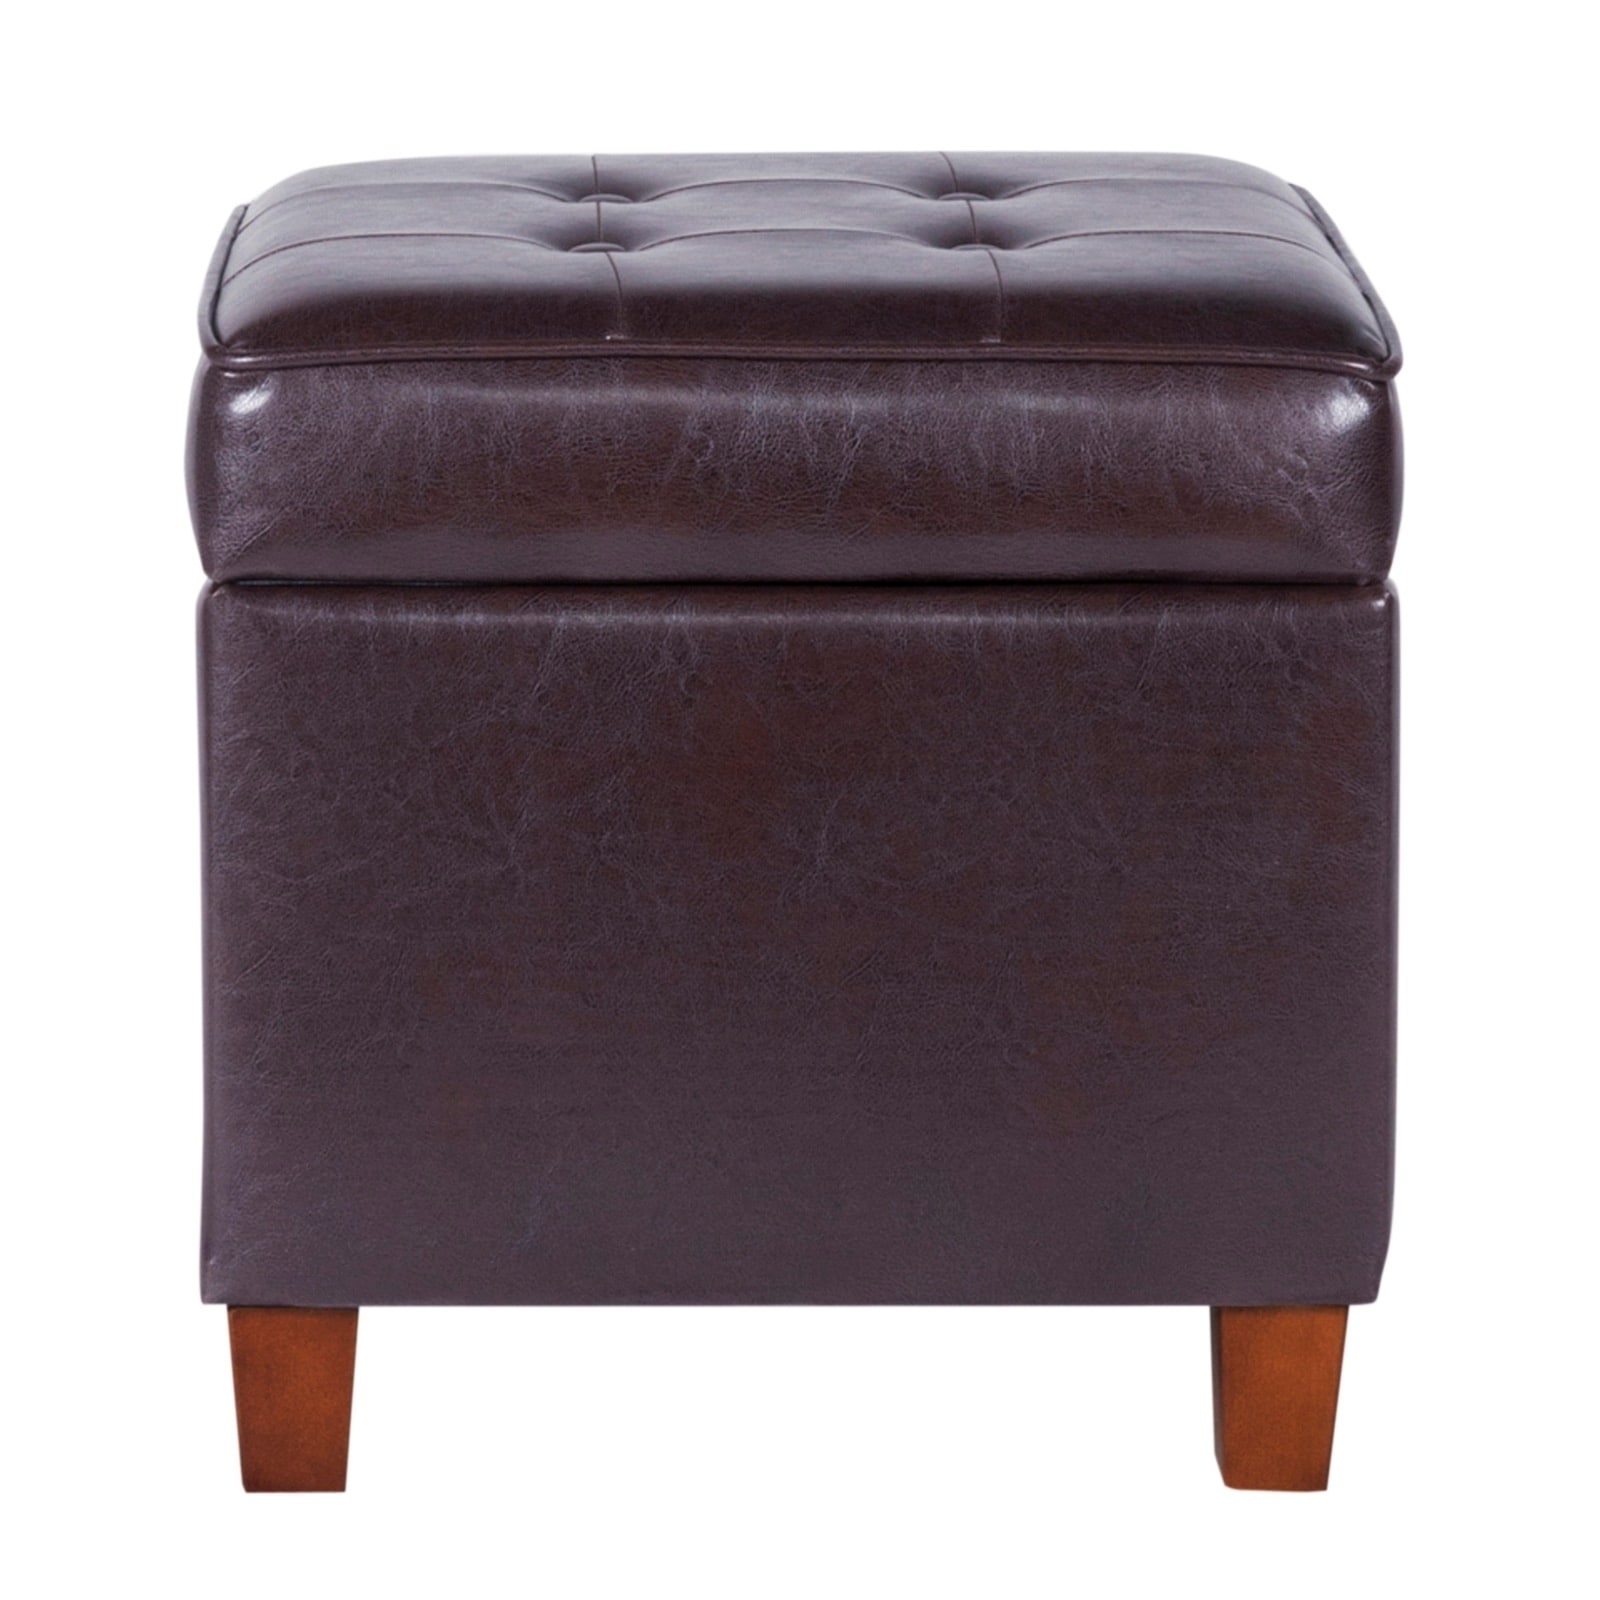 Benzara Square Shape Leatherette Upholstered Wooden Ottoman with Tufted Lift Off Lid Storage, Brown